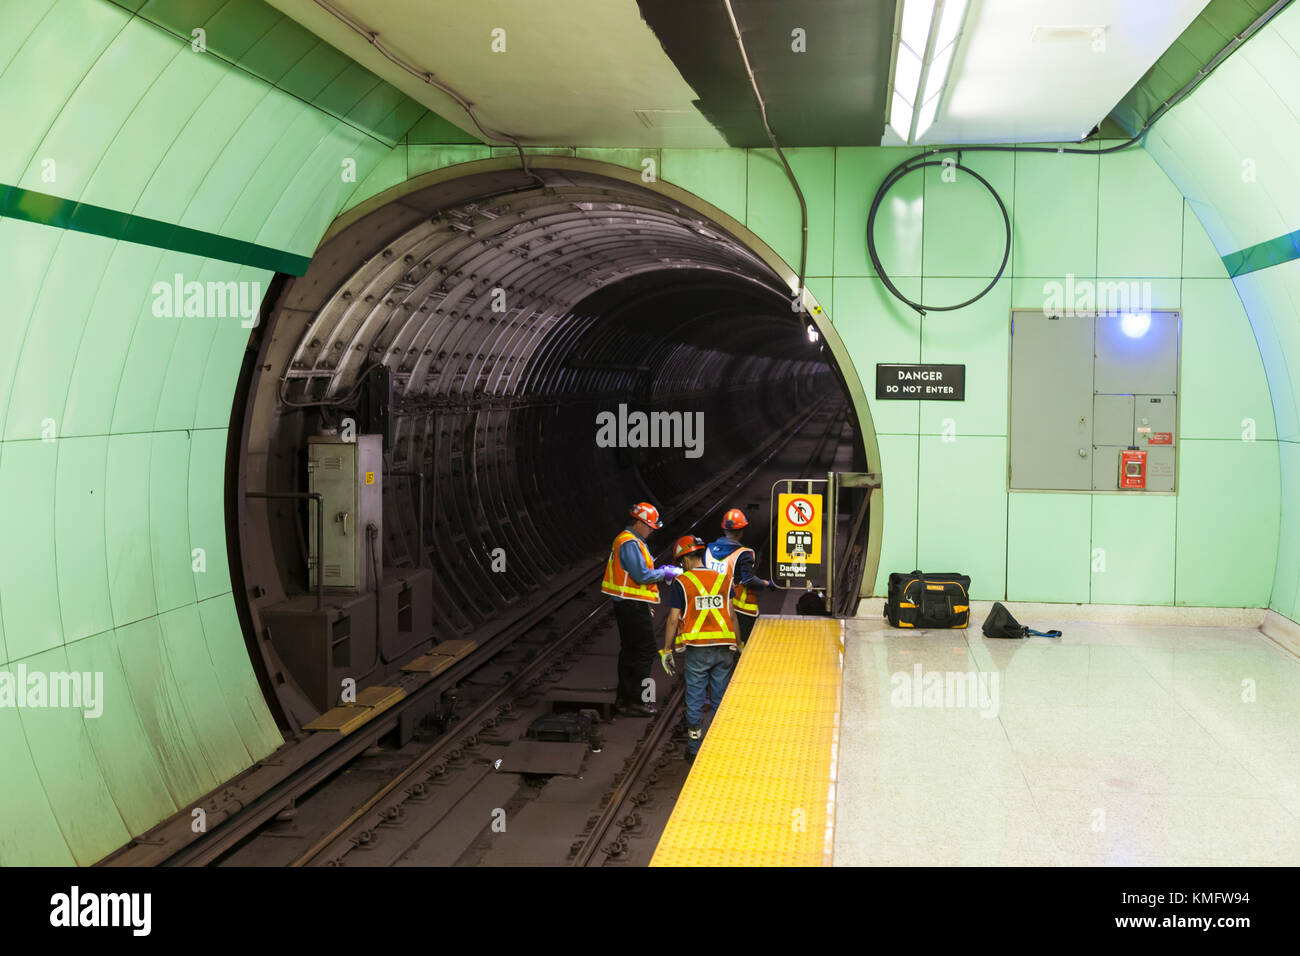 Toronto, Canada - Oct 17, 2017: Maintenance workers at a subway station in the city of Toronto, Canada Stock Photo